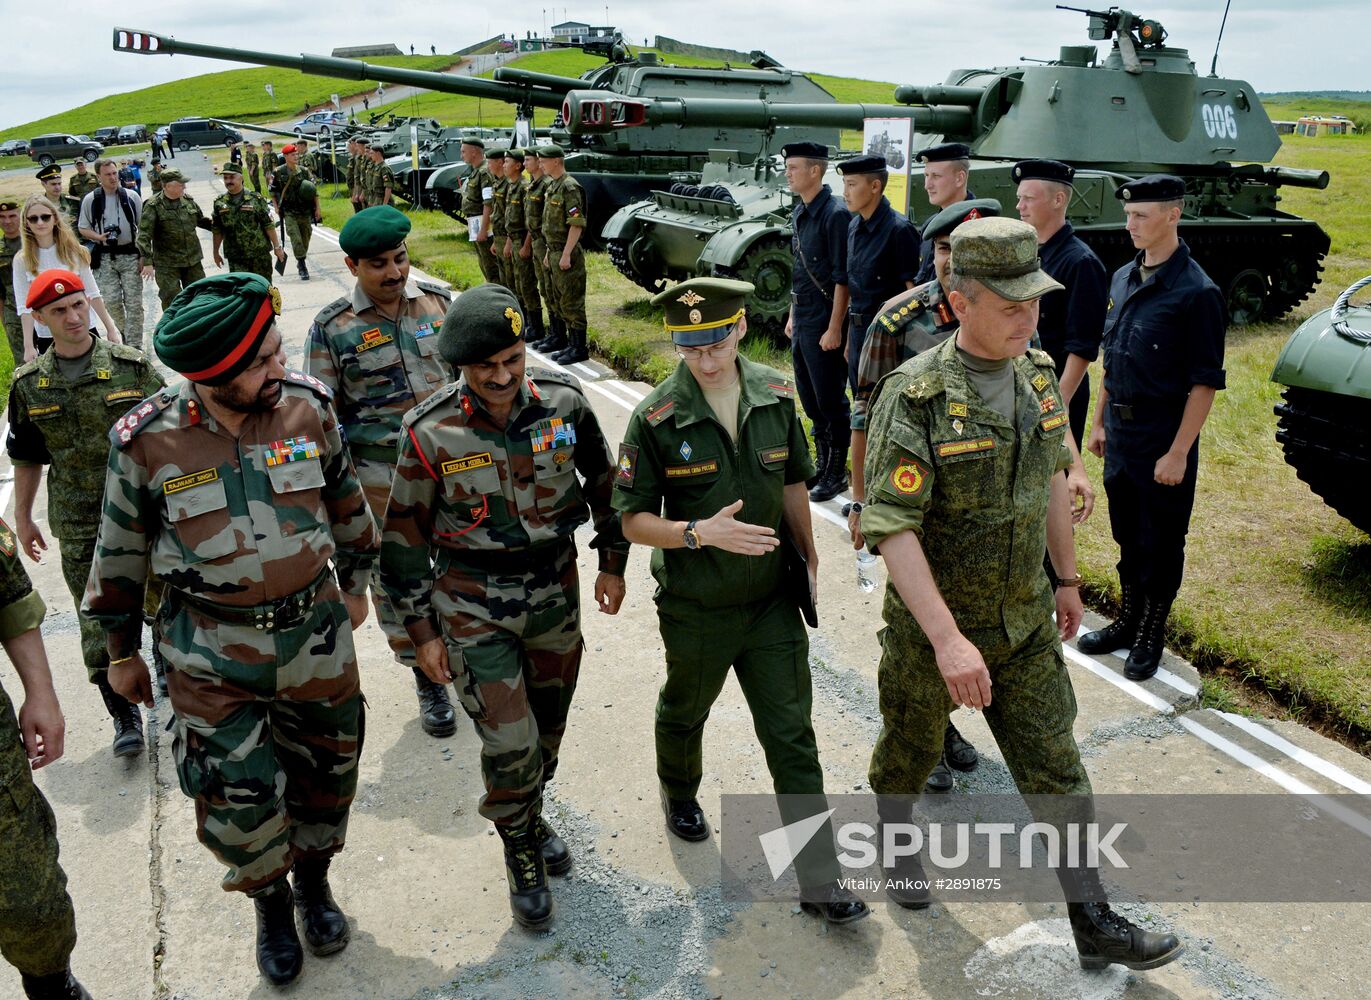 Indian military delegation visits 5th combined arms army to prepare joint Russian-Indian "Indra-2016" ground muscle exercises